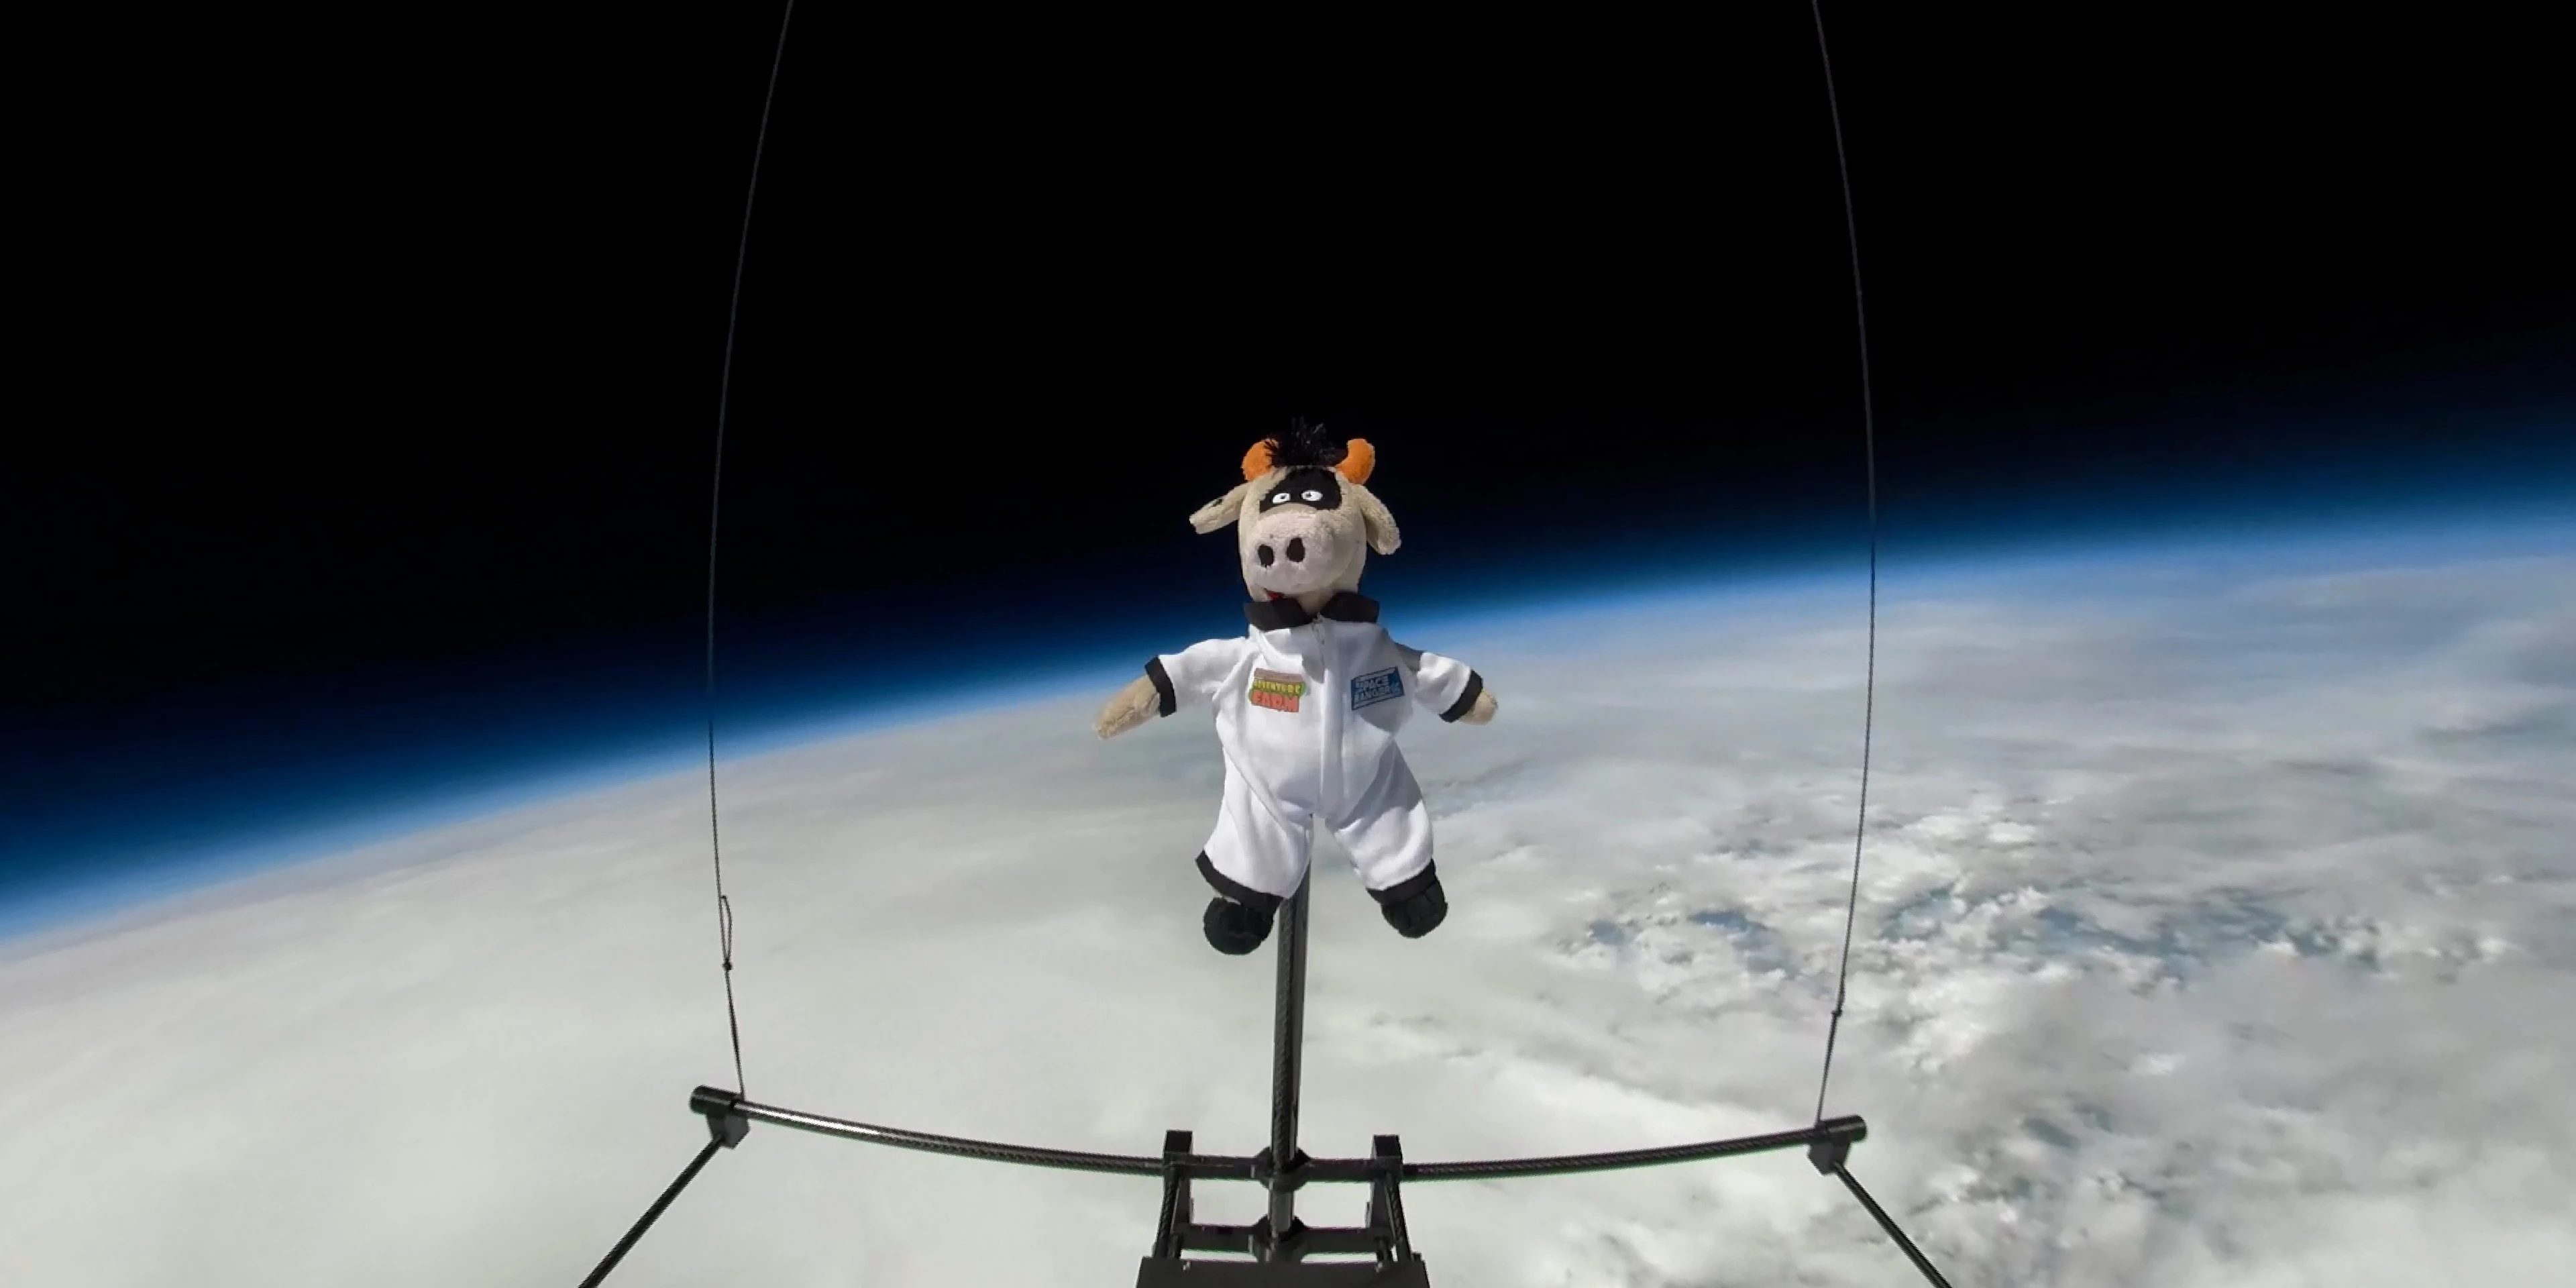 Crumpet the Cow on his voyage to the edge of space